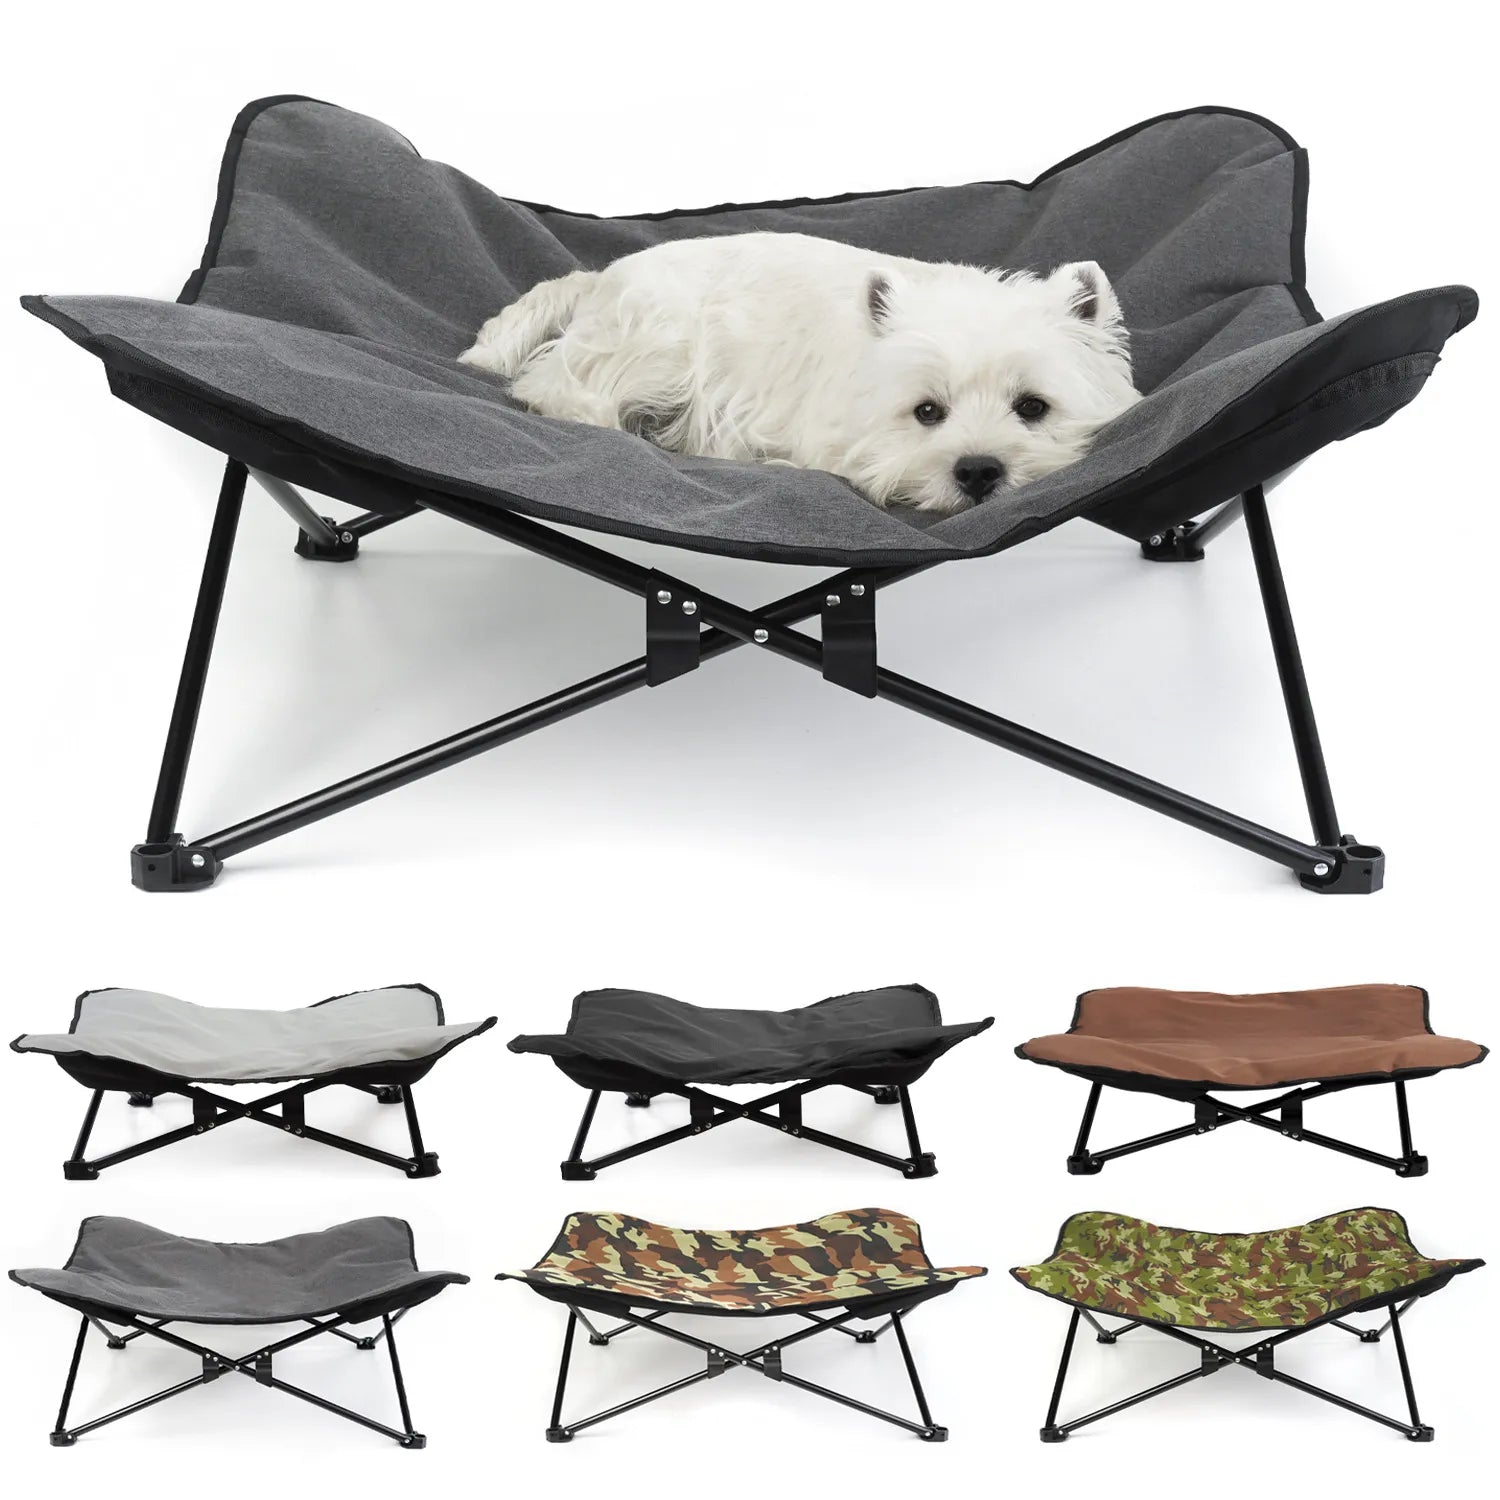 Portable Elevated Dog Bed